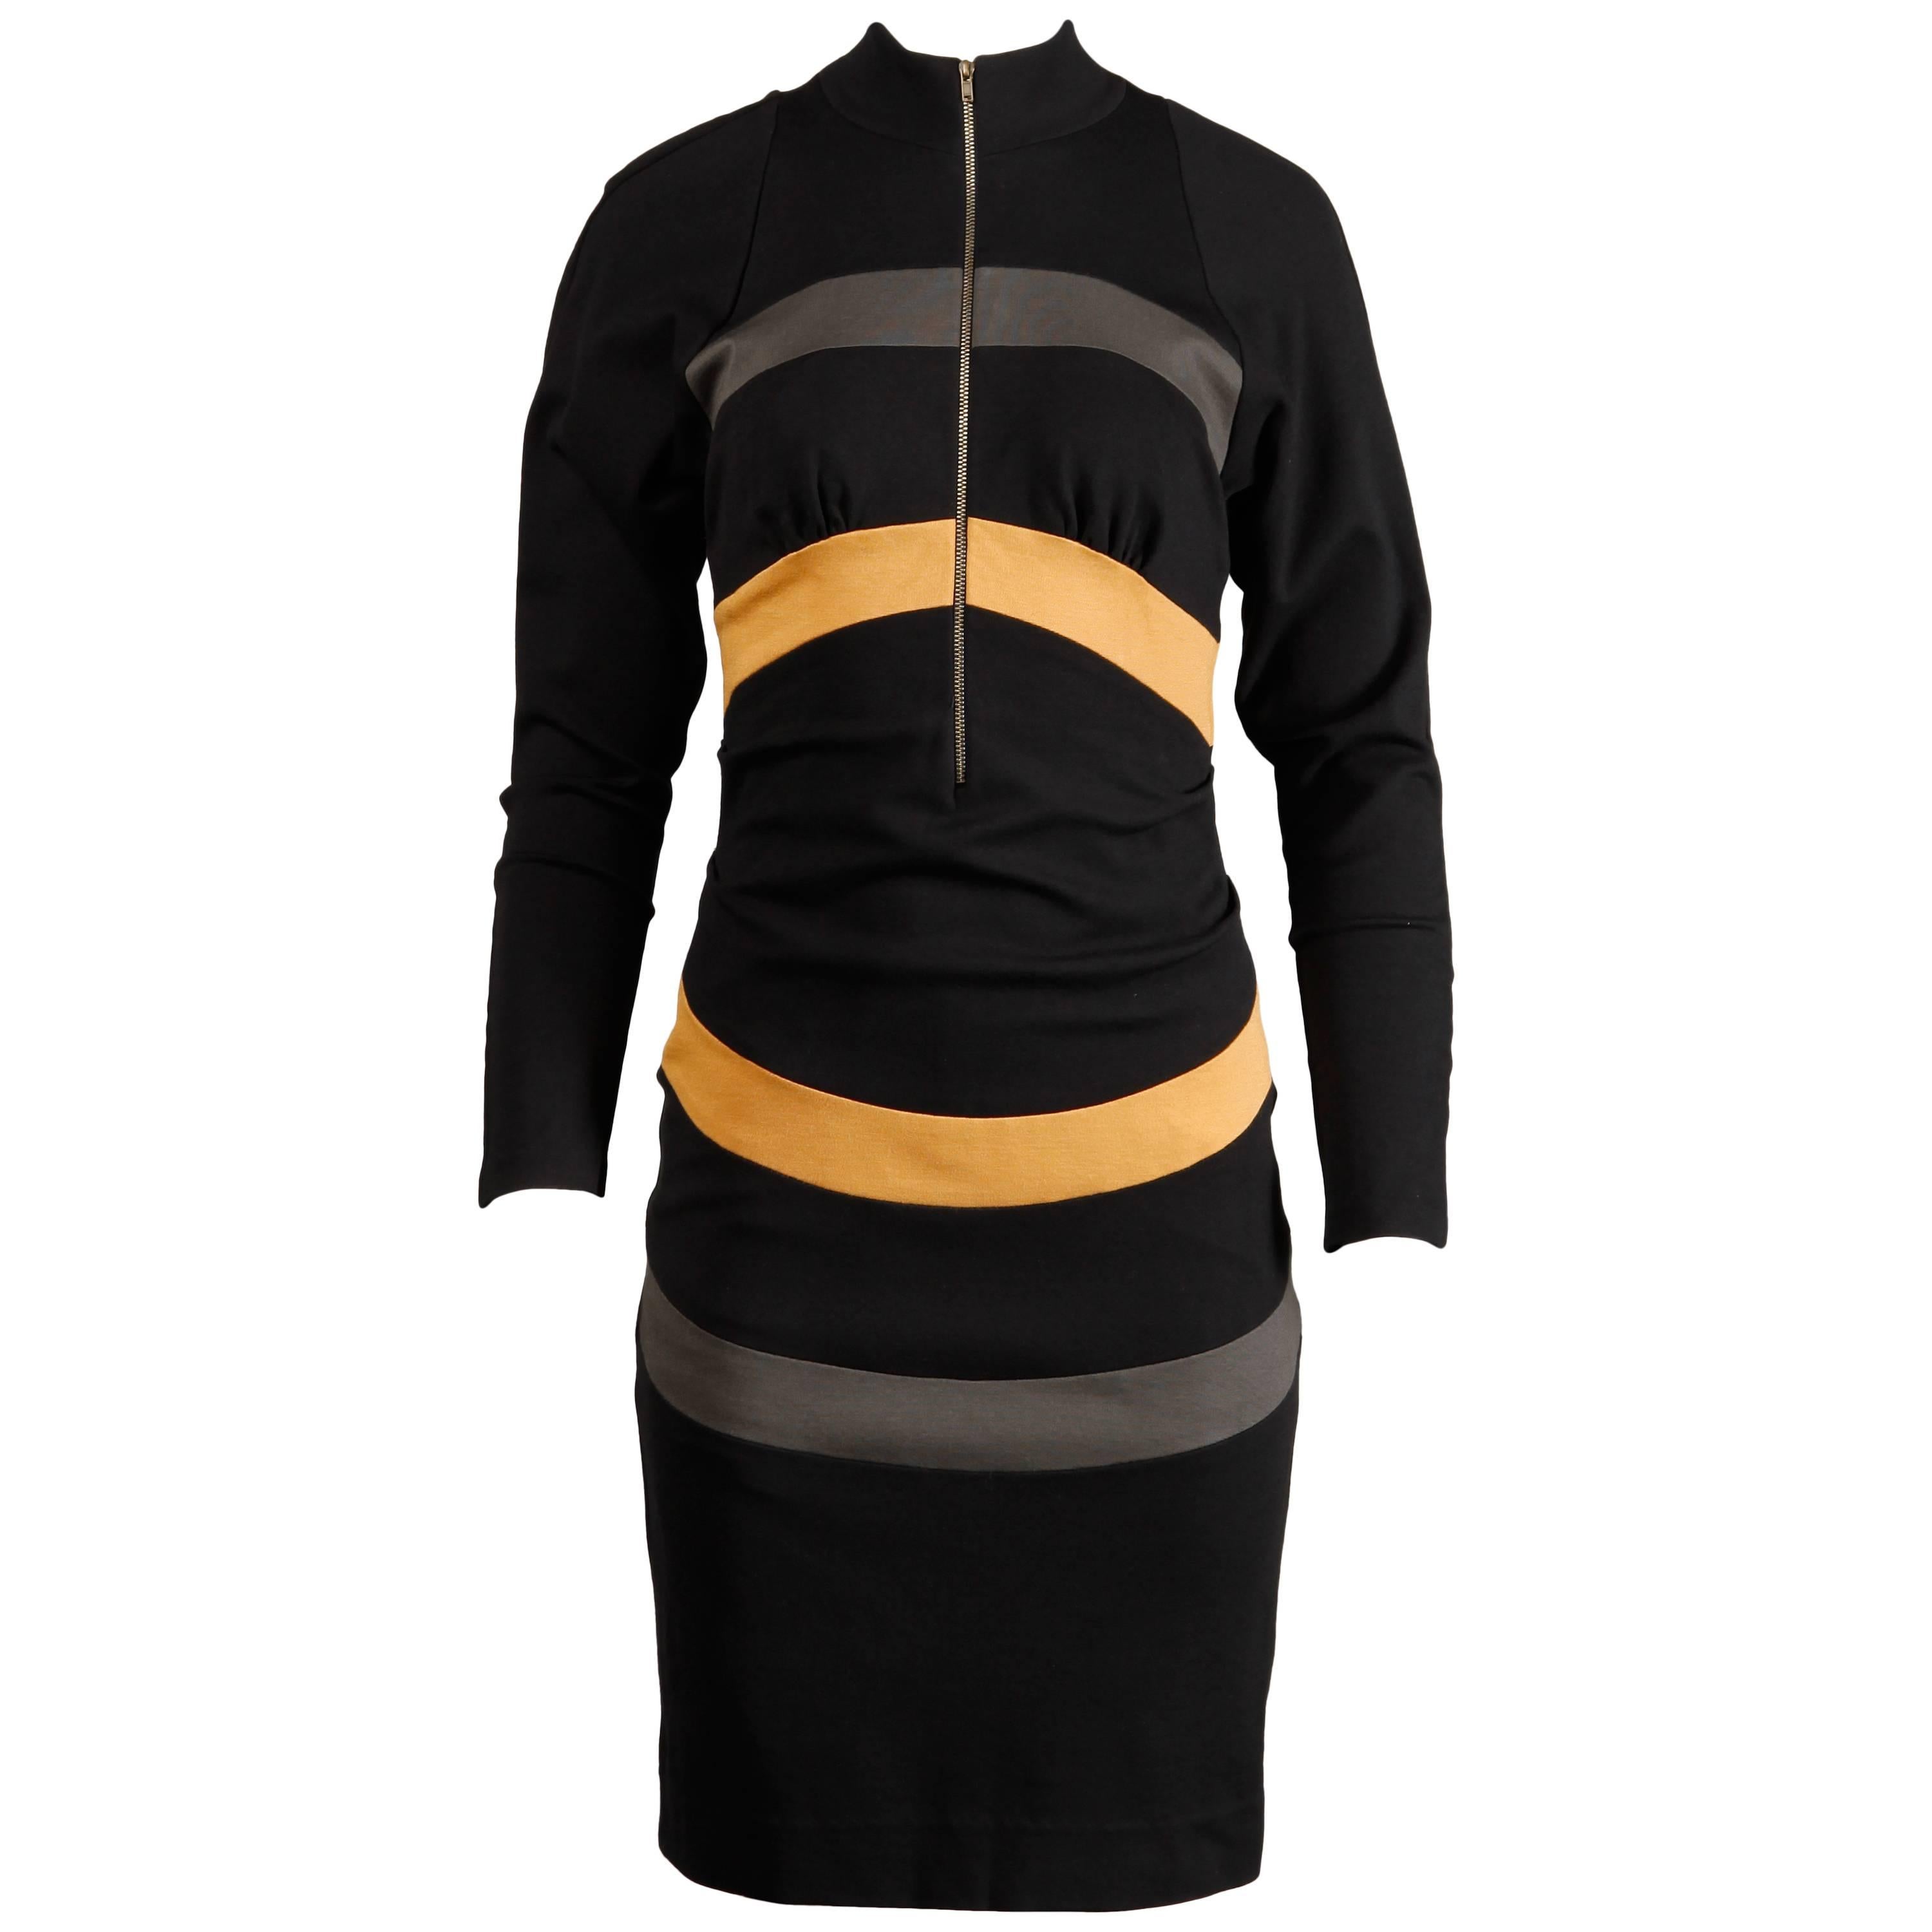 Avant garde circular striped dress by Thierry Mugler. Long sleeves and zip up front.

Details: 

Partially Lined
Front Metal Zip Closure
Marked Size: 40
Estimated Size: Small-Medium
Color: Black/ Grey/ Gold
Fabric: Jersey (Feels like Wool)
Label: